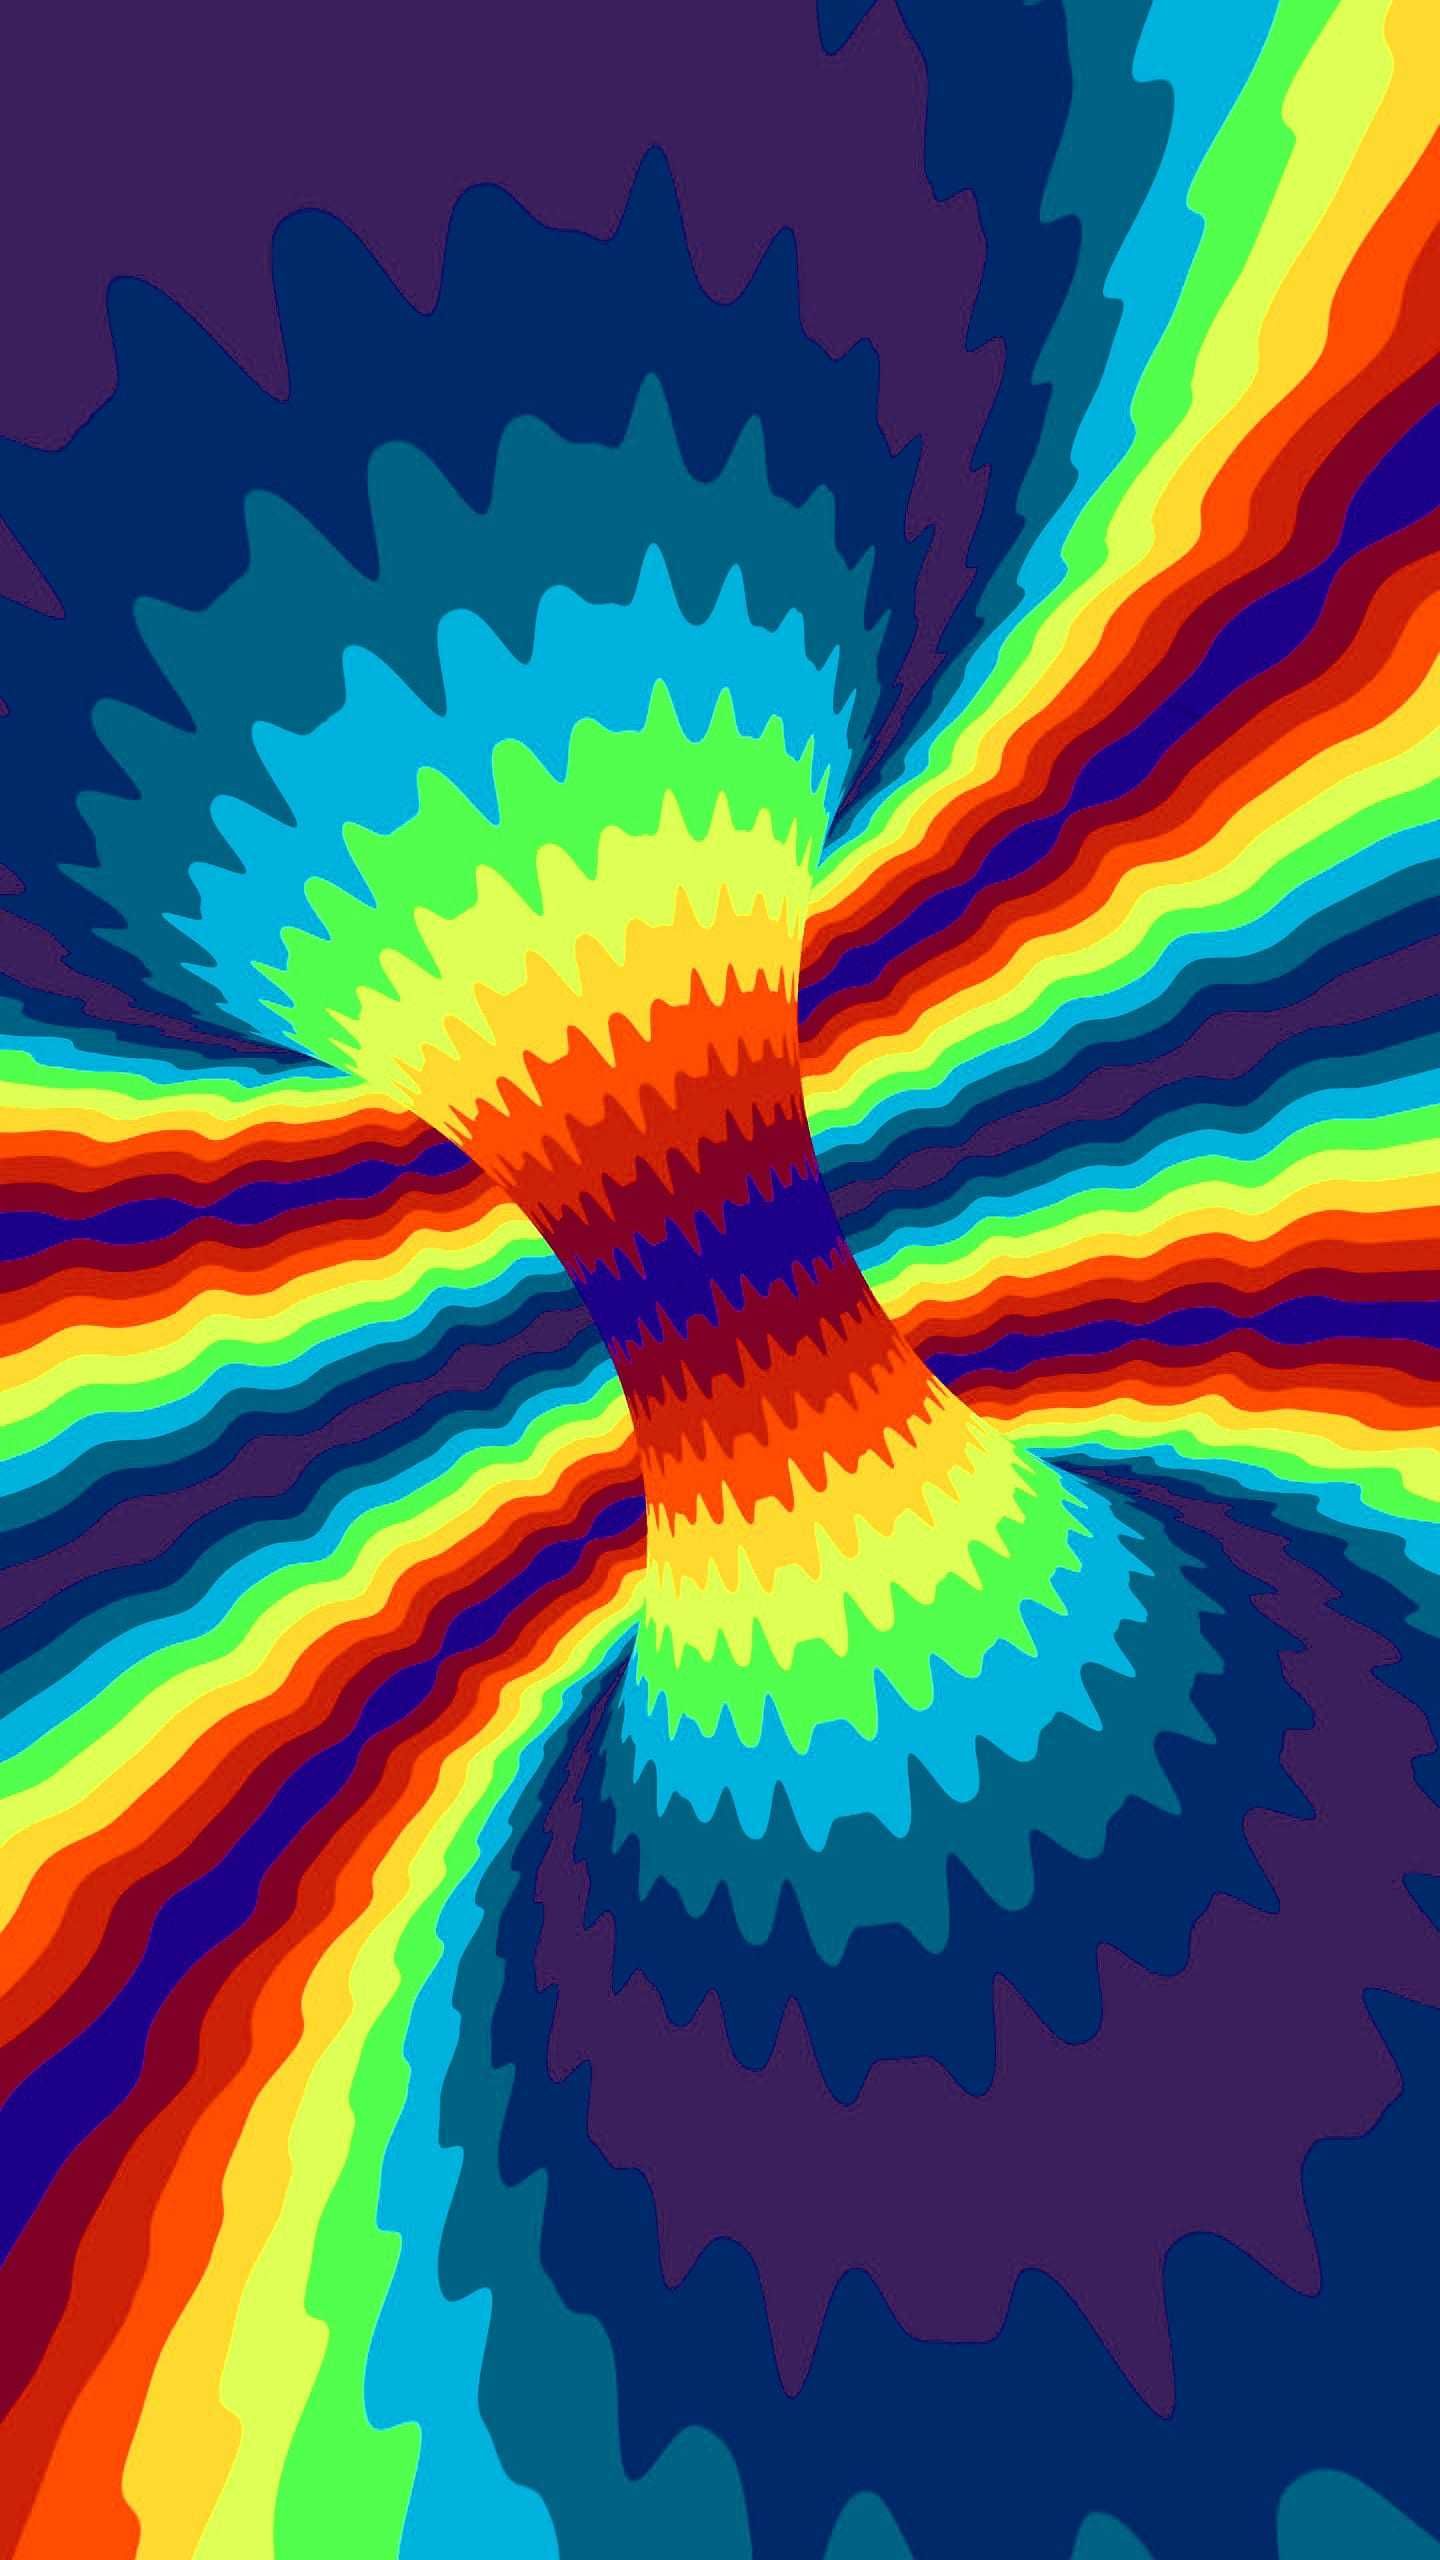 A colorful, swirling pattern on the screen - Weirdcore